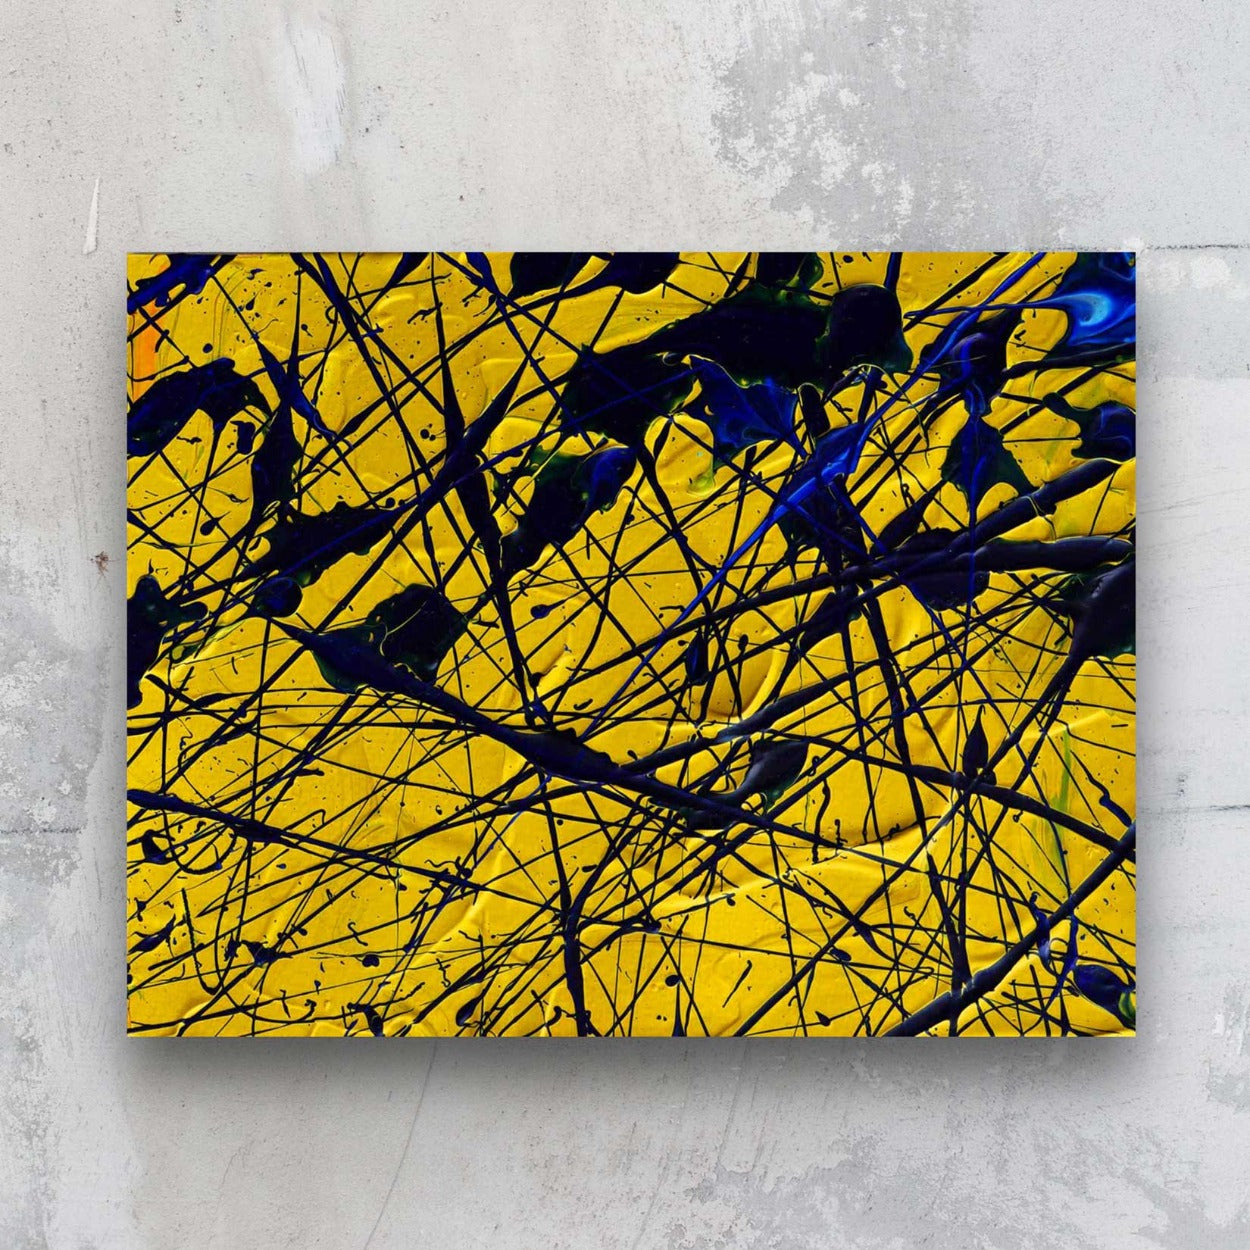 Yellow, Original abstract painting on paper in rich yellows and blues. Seen hanging on stone wall, painted by Bridget Bradley